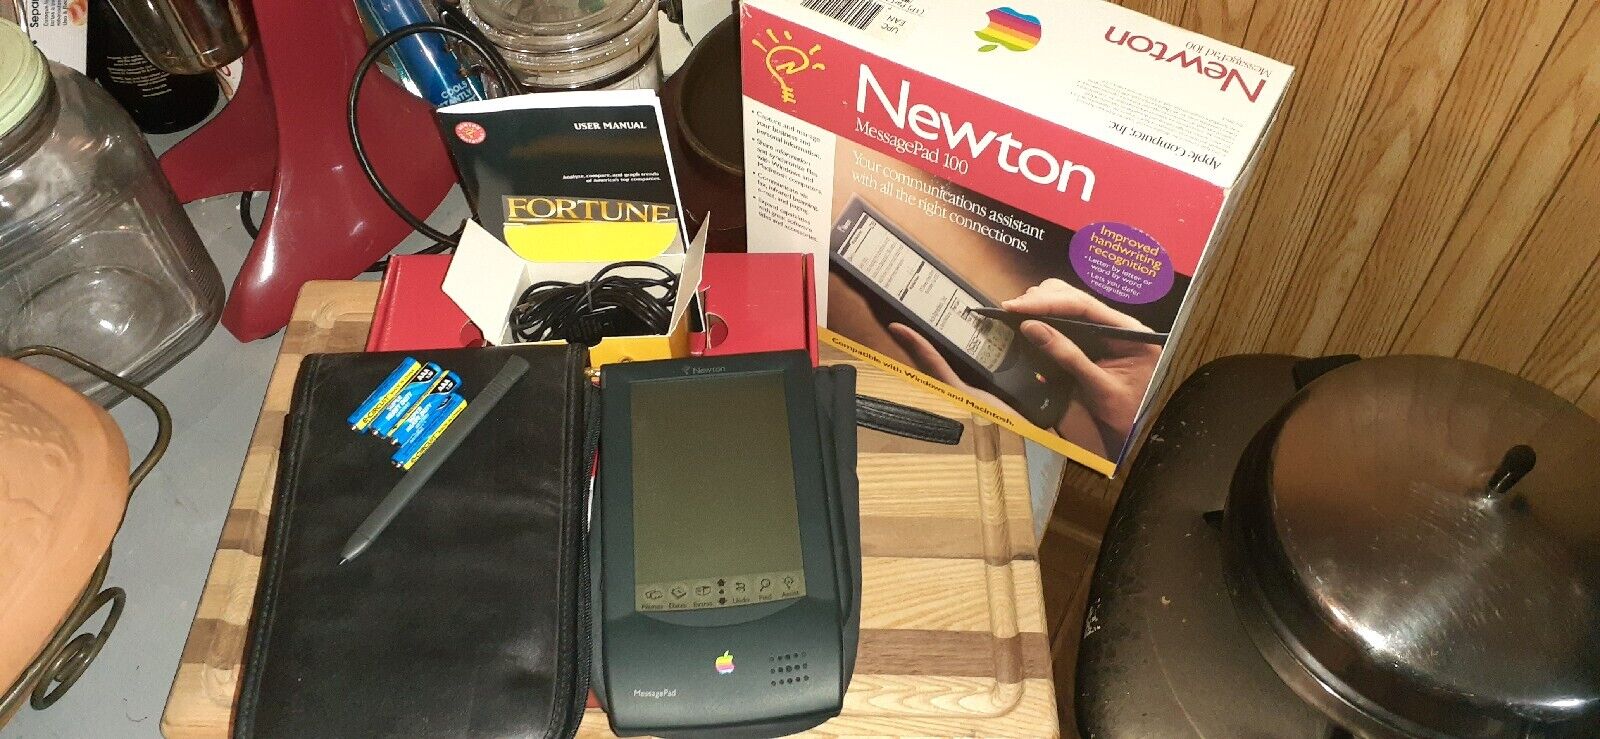 Apple Newton Message Pad  H1000 1993 w/Stylus and original packaging - WORKING